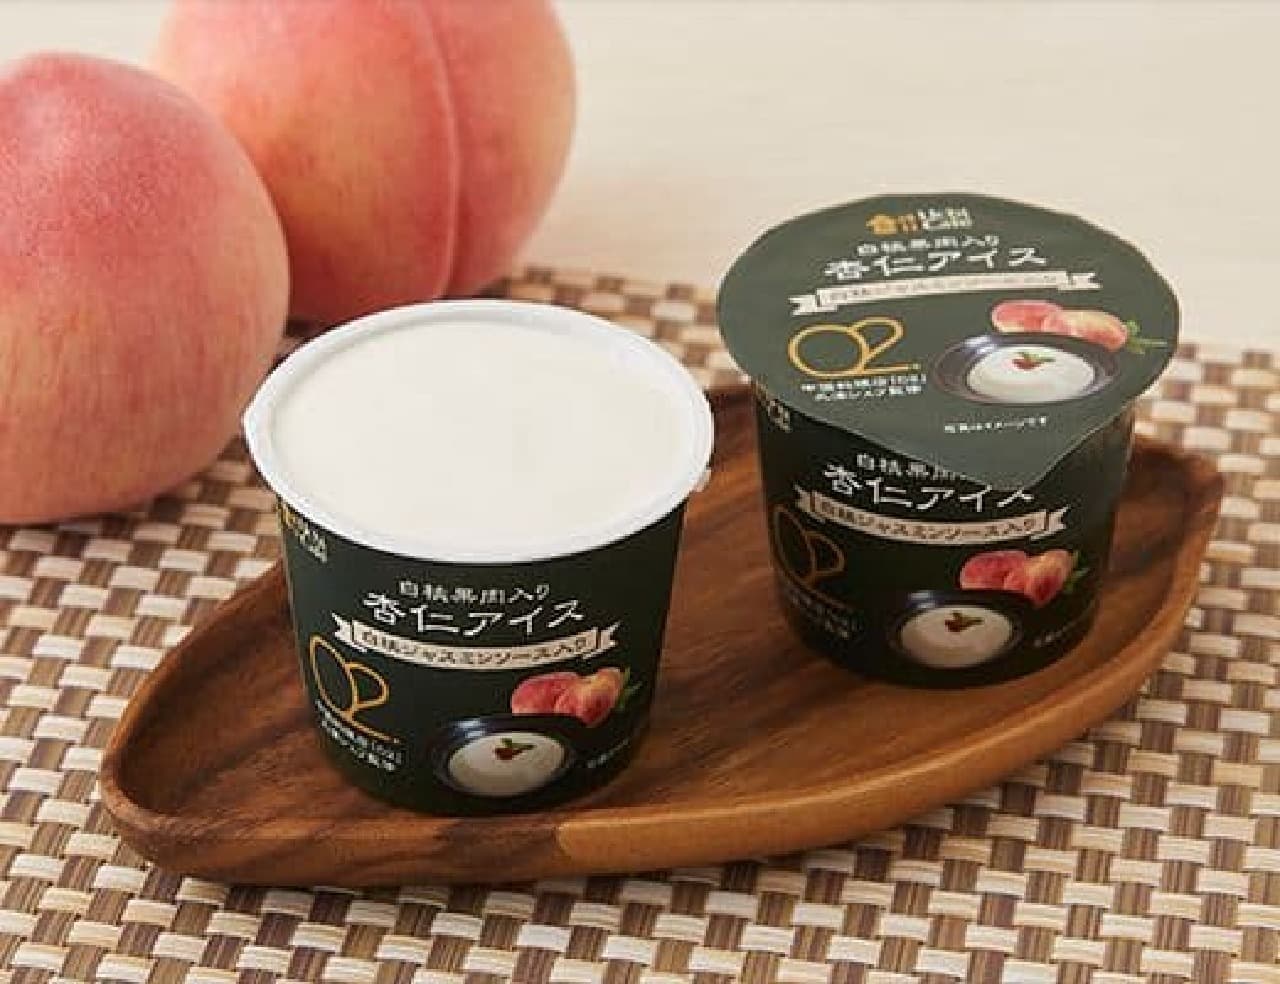 LAWSON "Uchicaffe O2 supervised apricot ice cream with white peach pulp 120ml